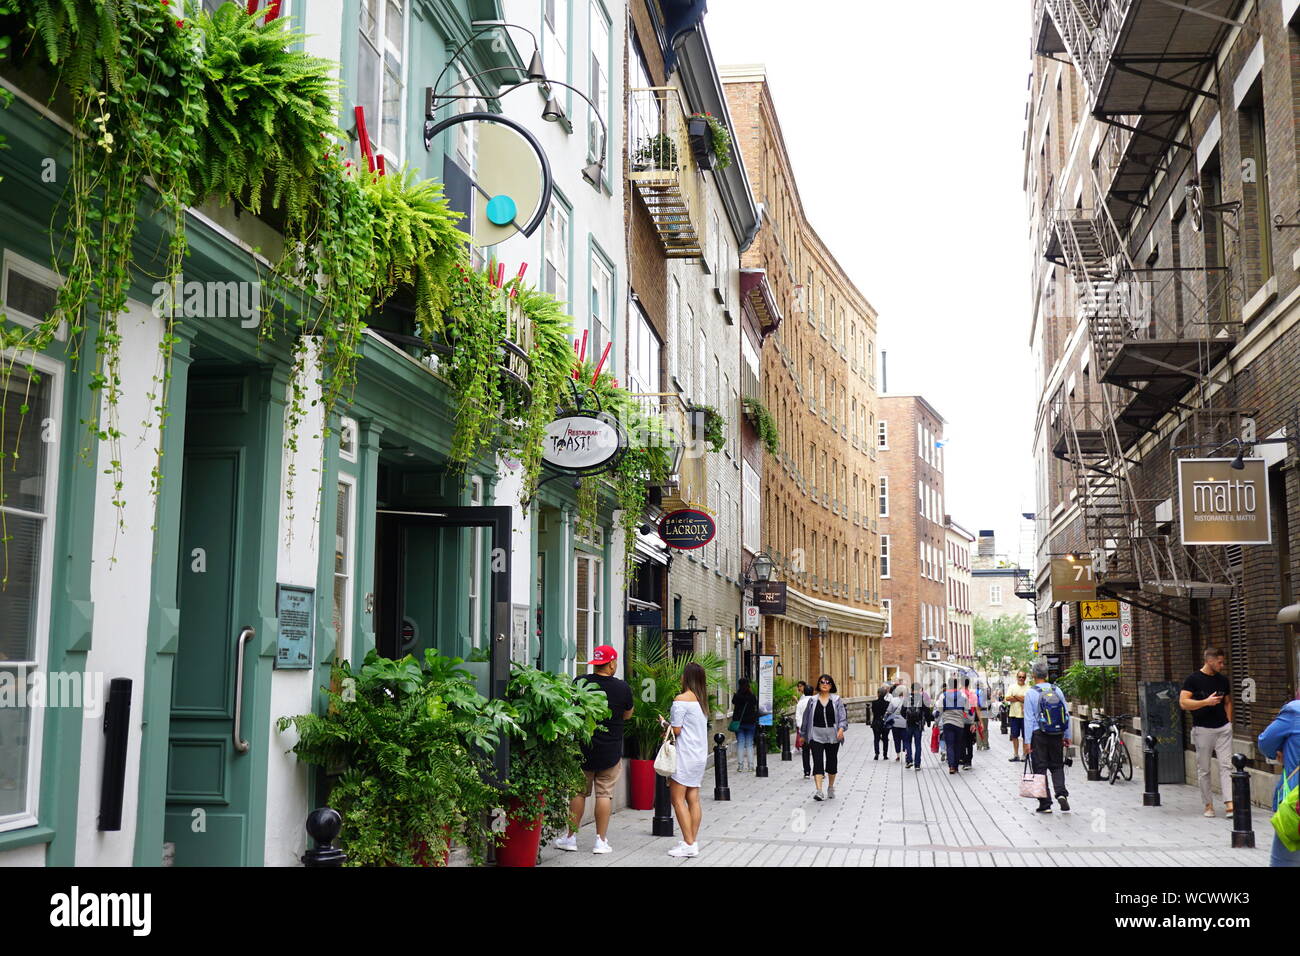 Travelers (beautiful architecture and greenery on buildings), Old Quebec City, Canada Stock Photo